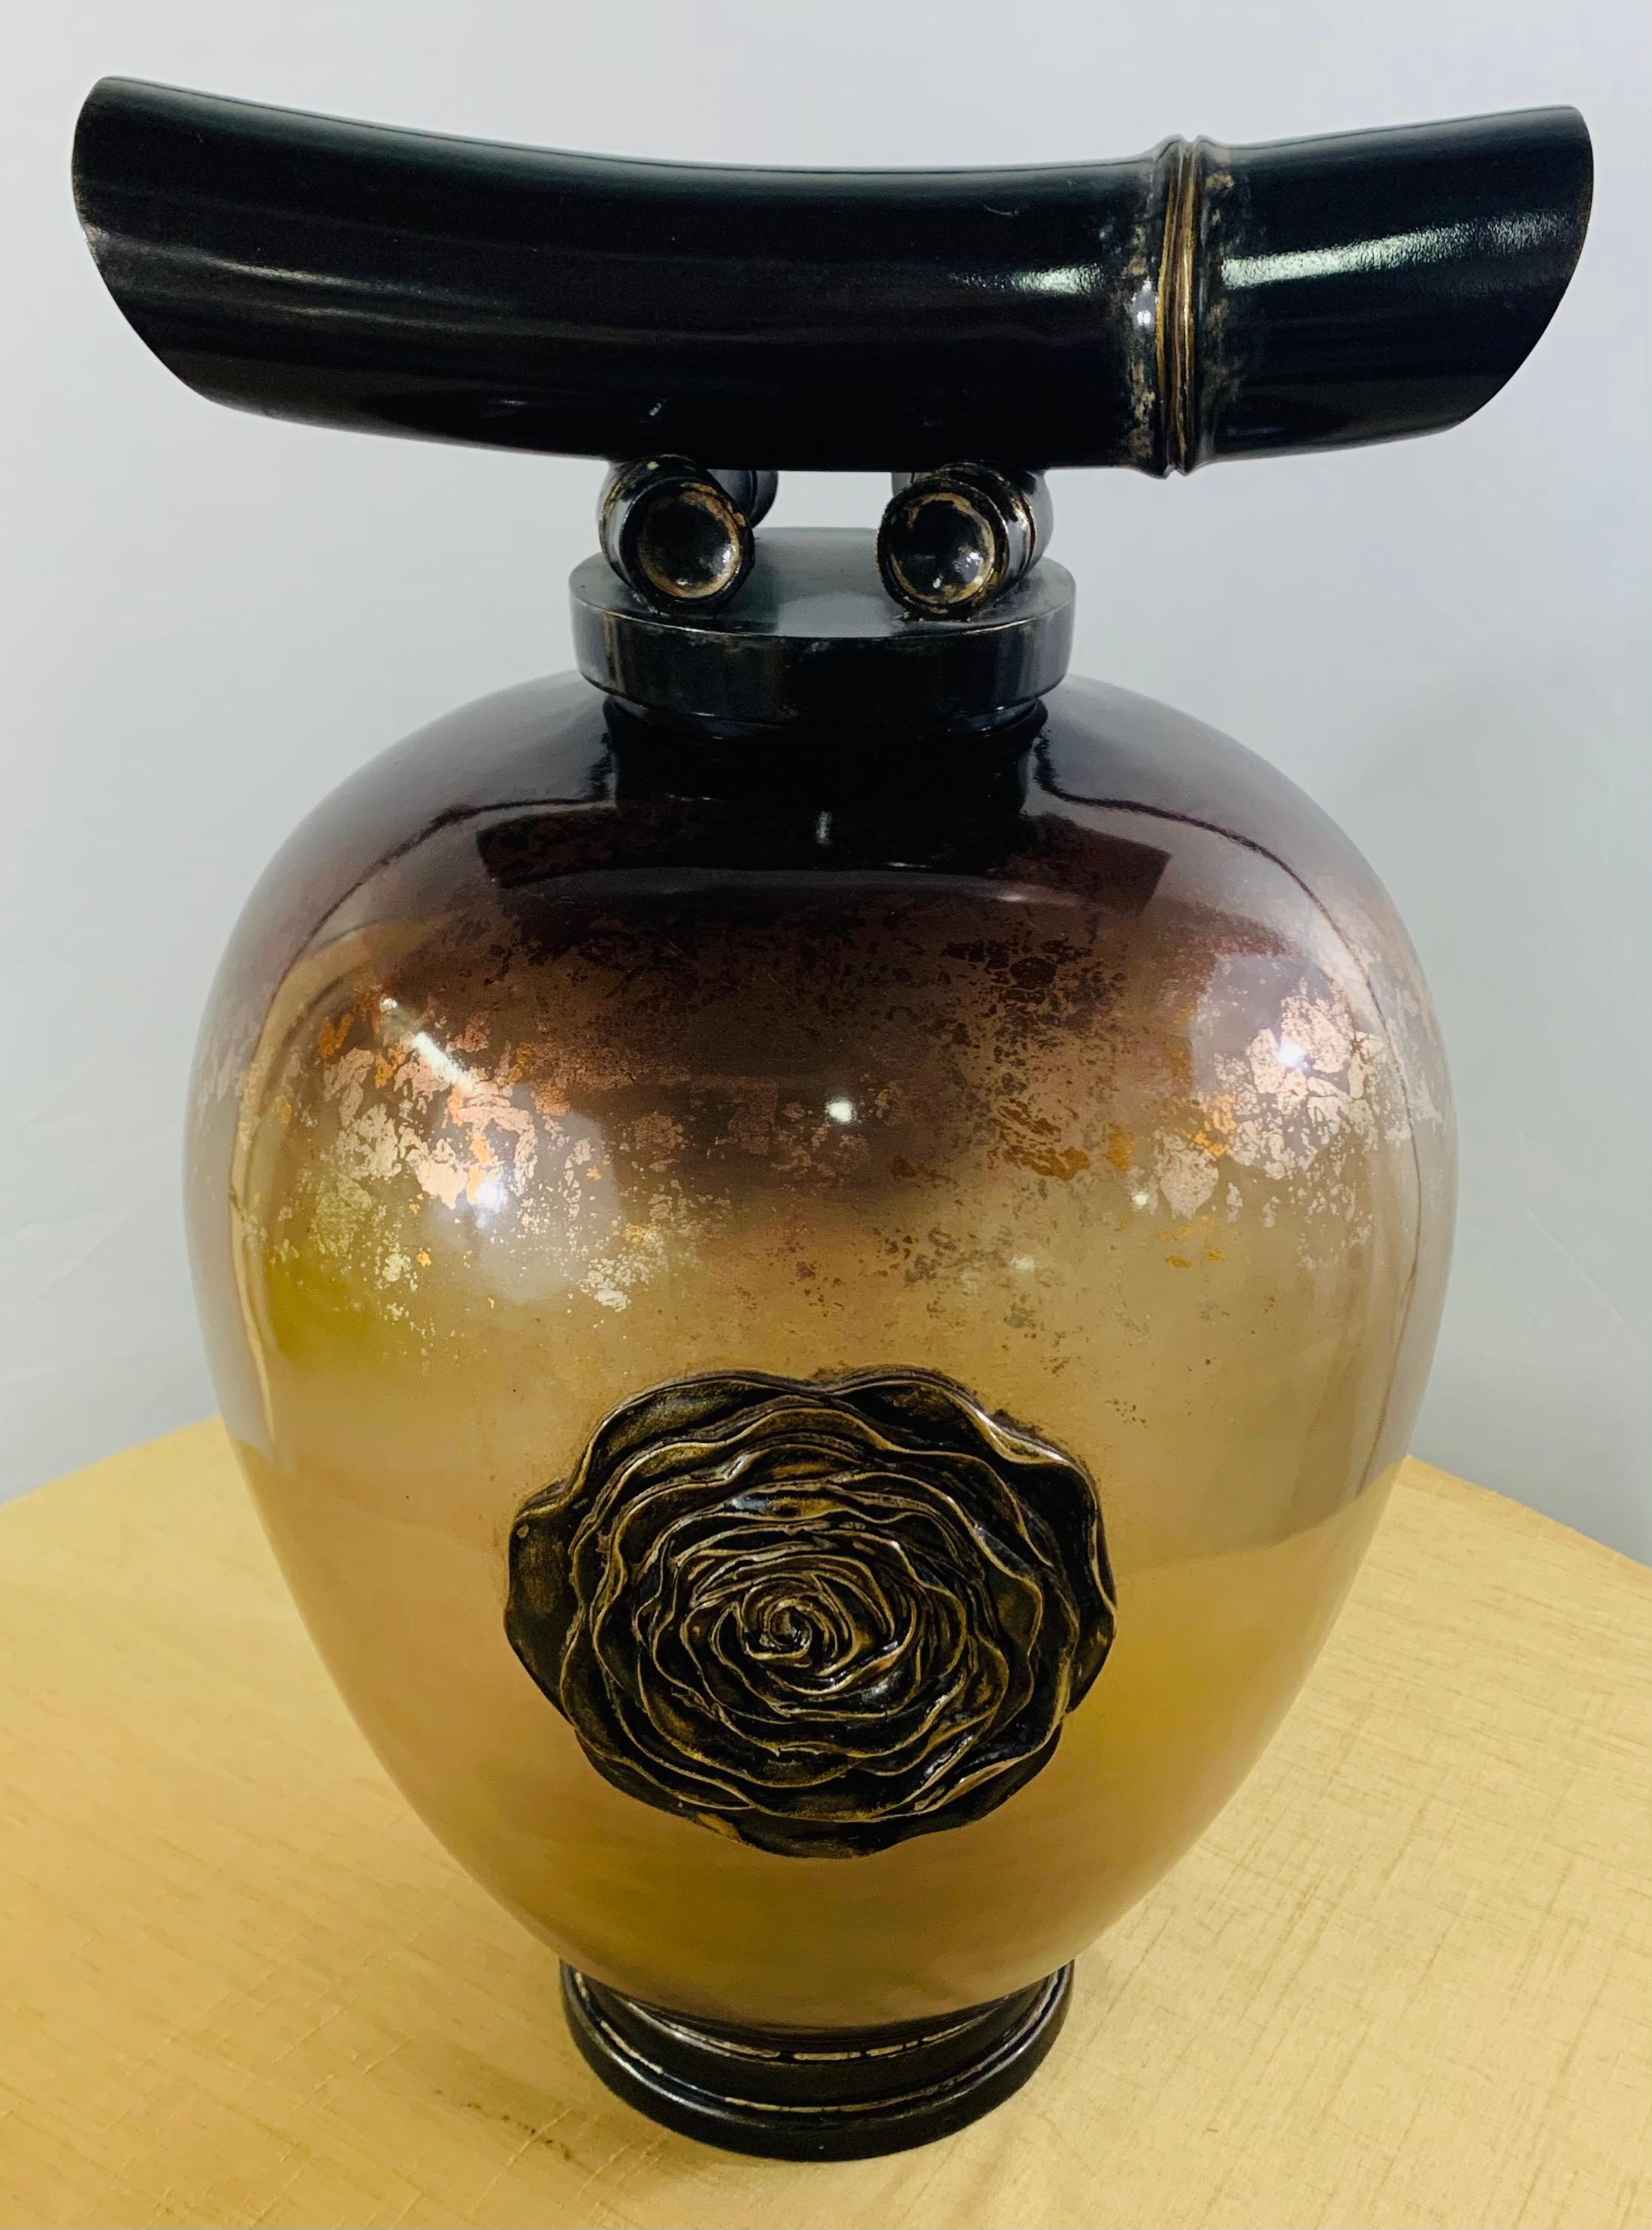 A highly decorative vintage Asian amber glass vase or lid urn. The urn features a handcrafted flower brass design in the center of the vase, a round wooden base in black and gilt decorated. The lid of the urn is in the shape of a sword holder or